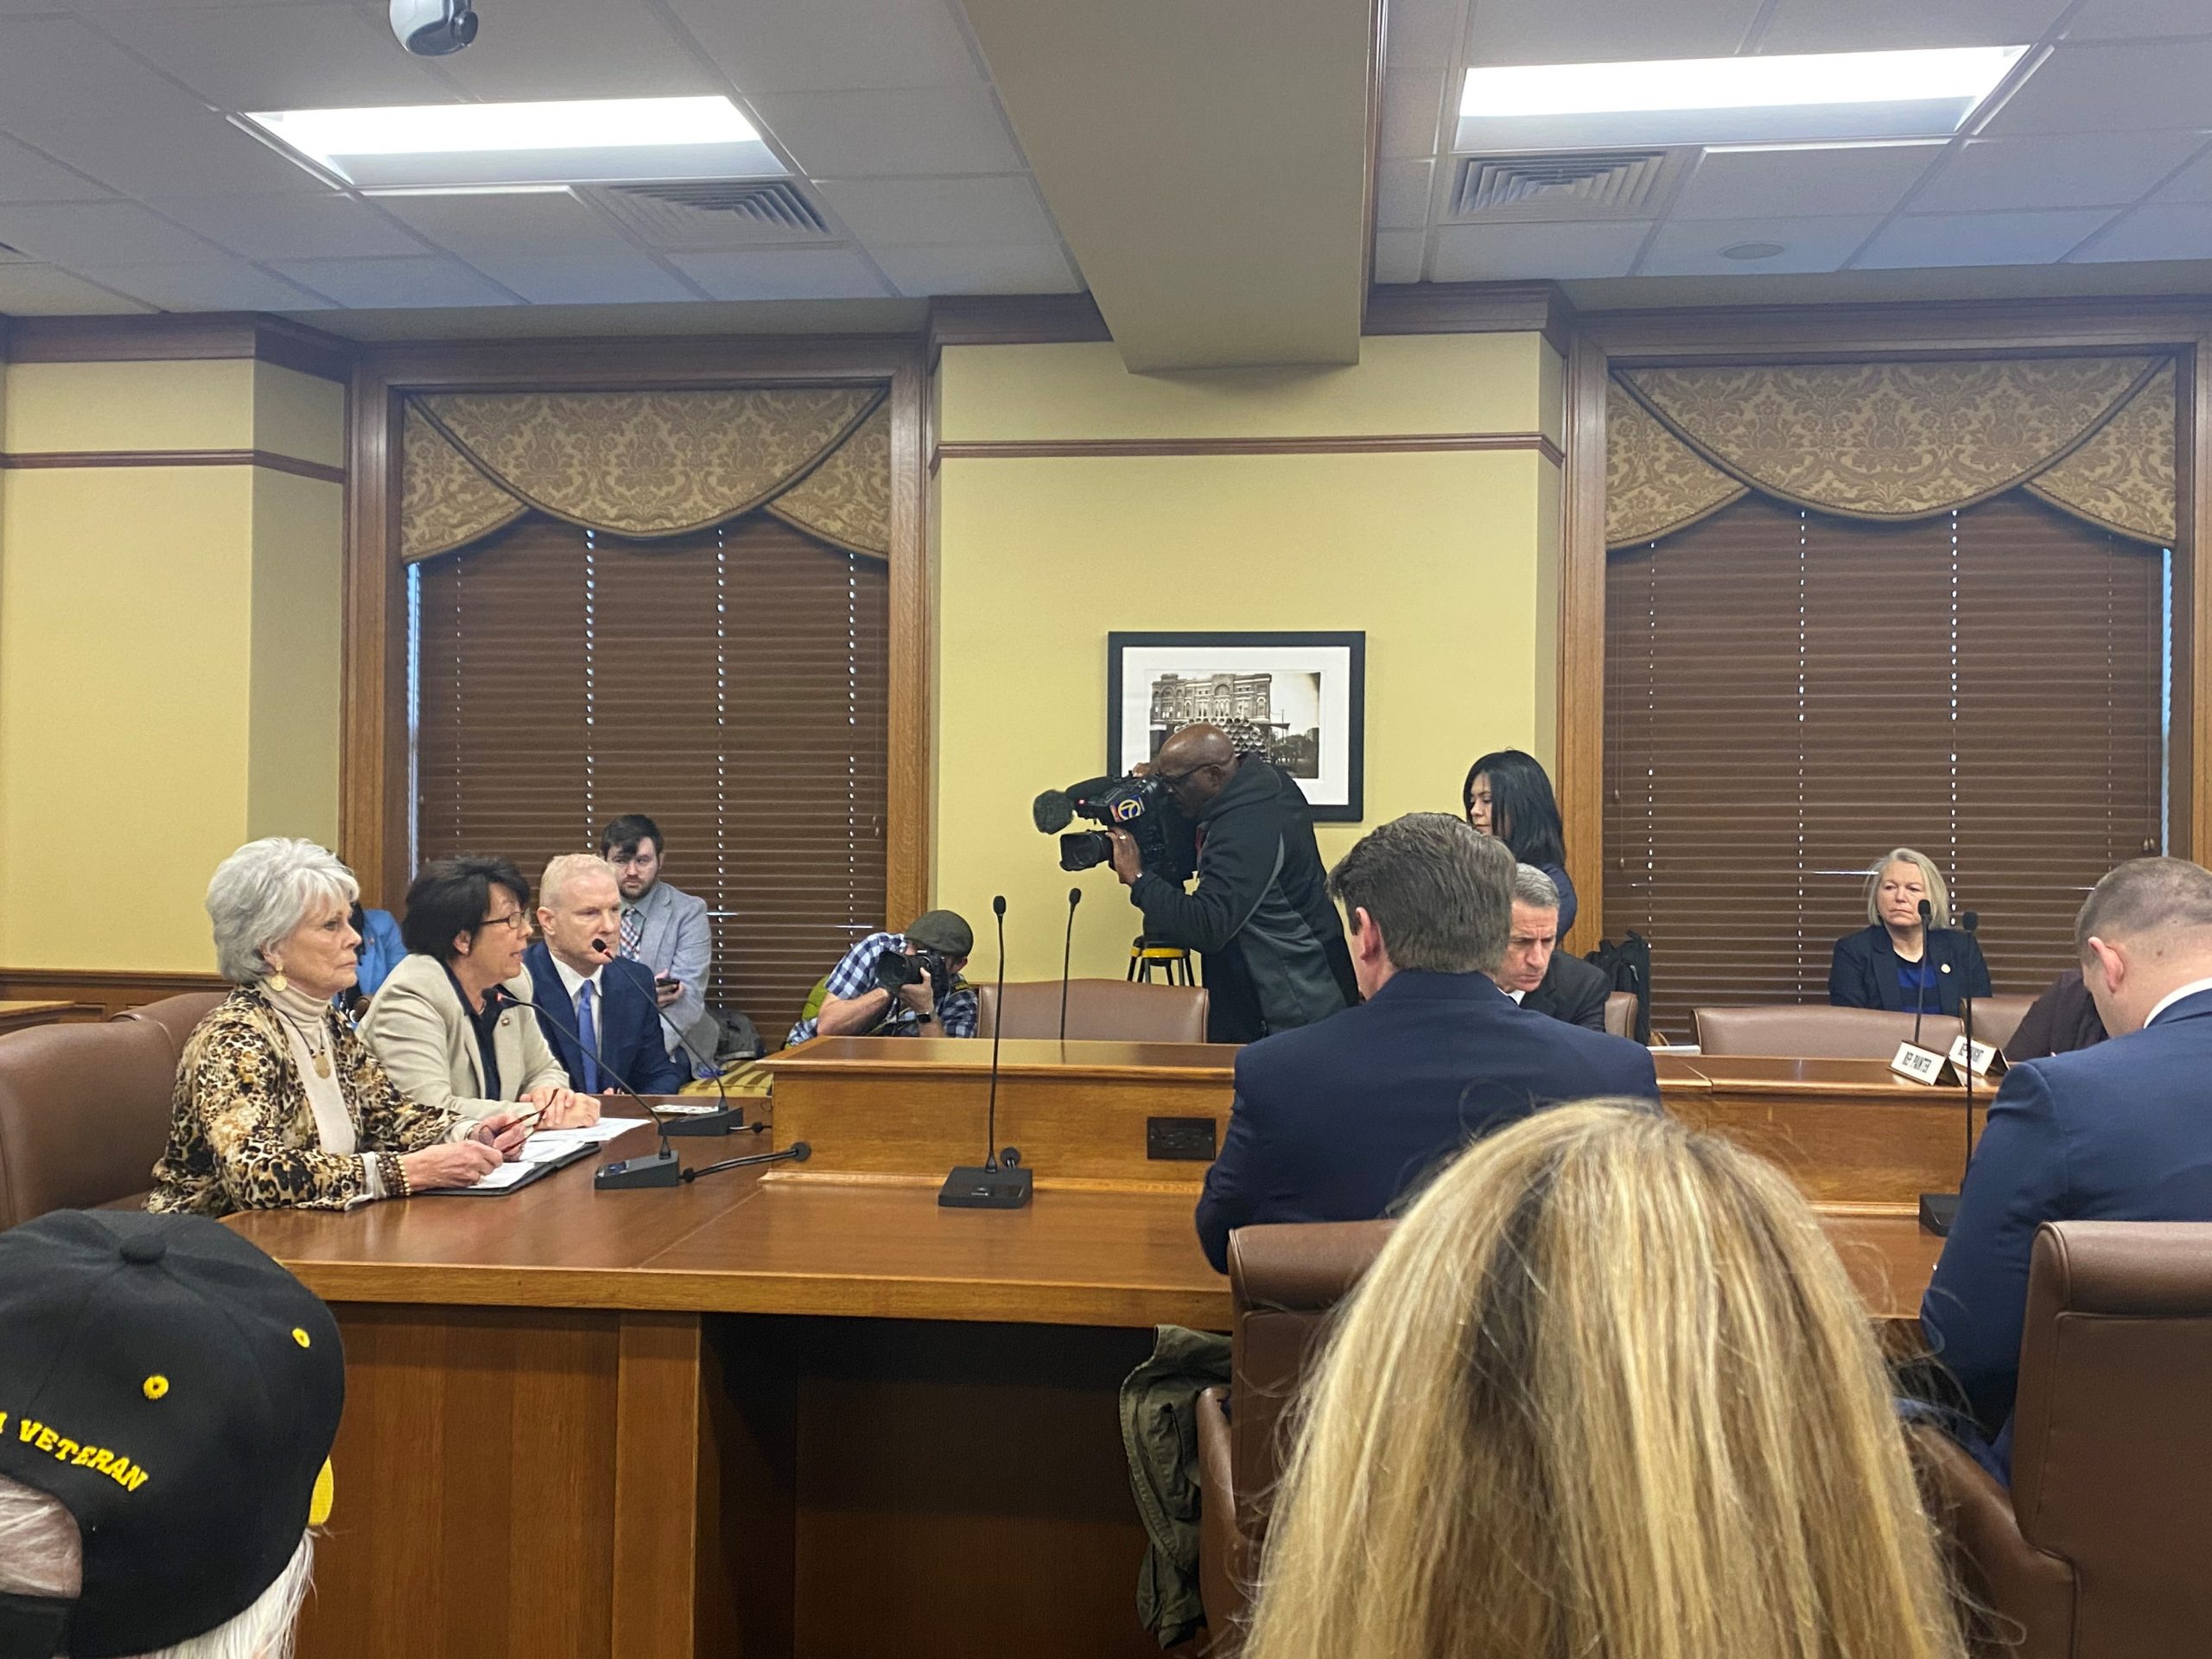 House Committee Hears Testimony On Bill Protecting Public School Student Privacy in Locker Rooms, Restrooms